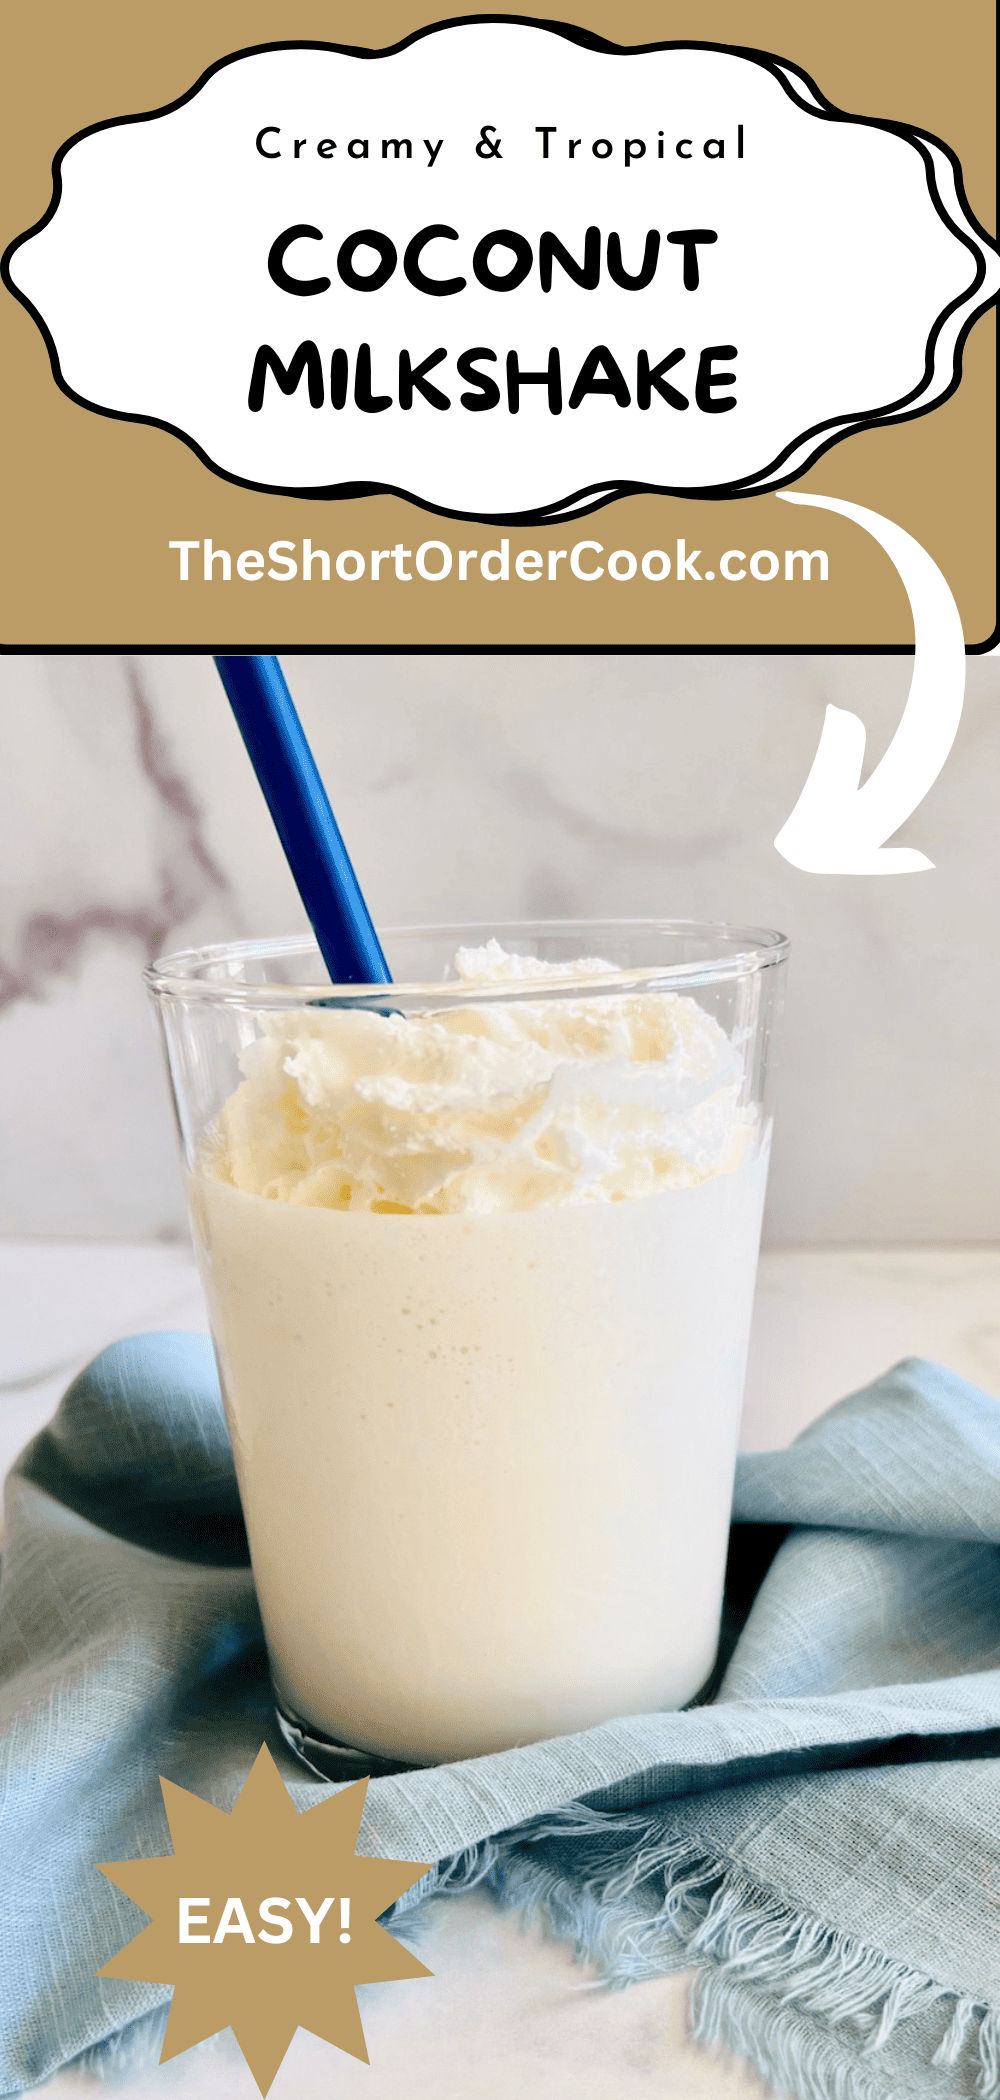 Clear glass filled with white coconut milkshake, whipped cream, and a blue straw.